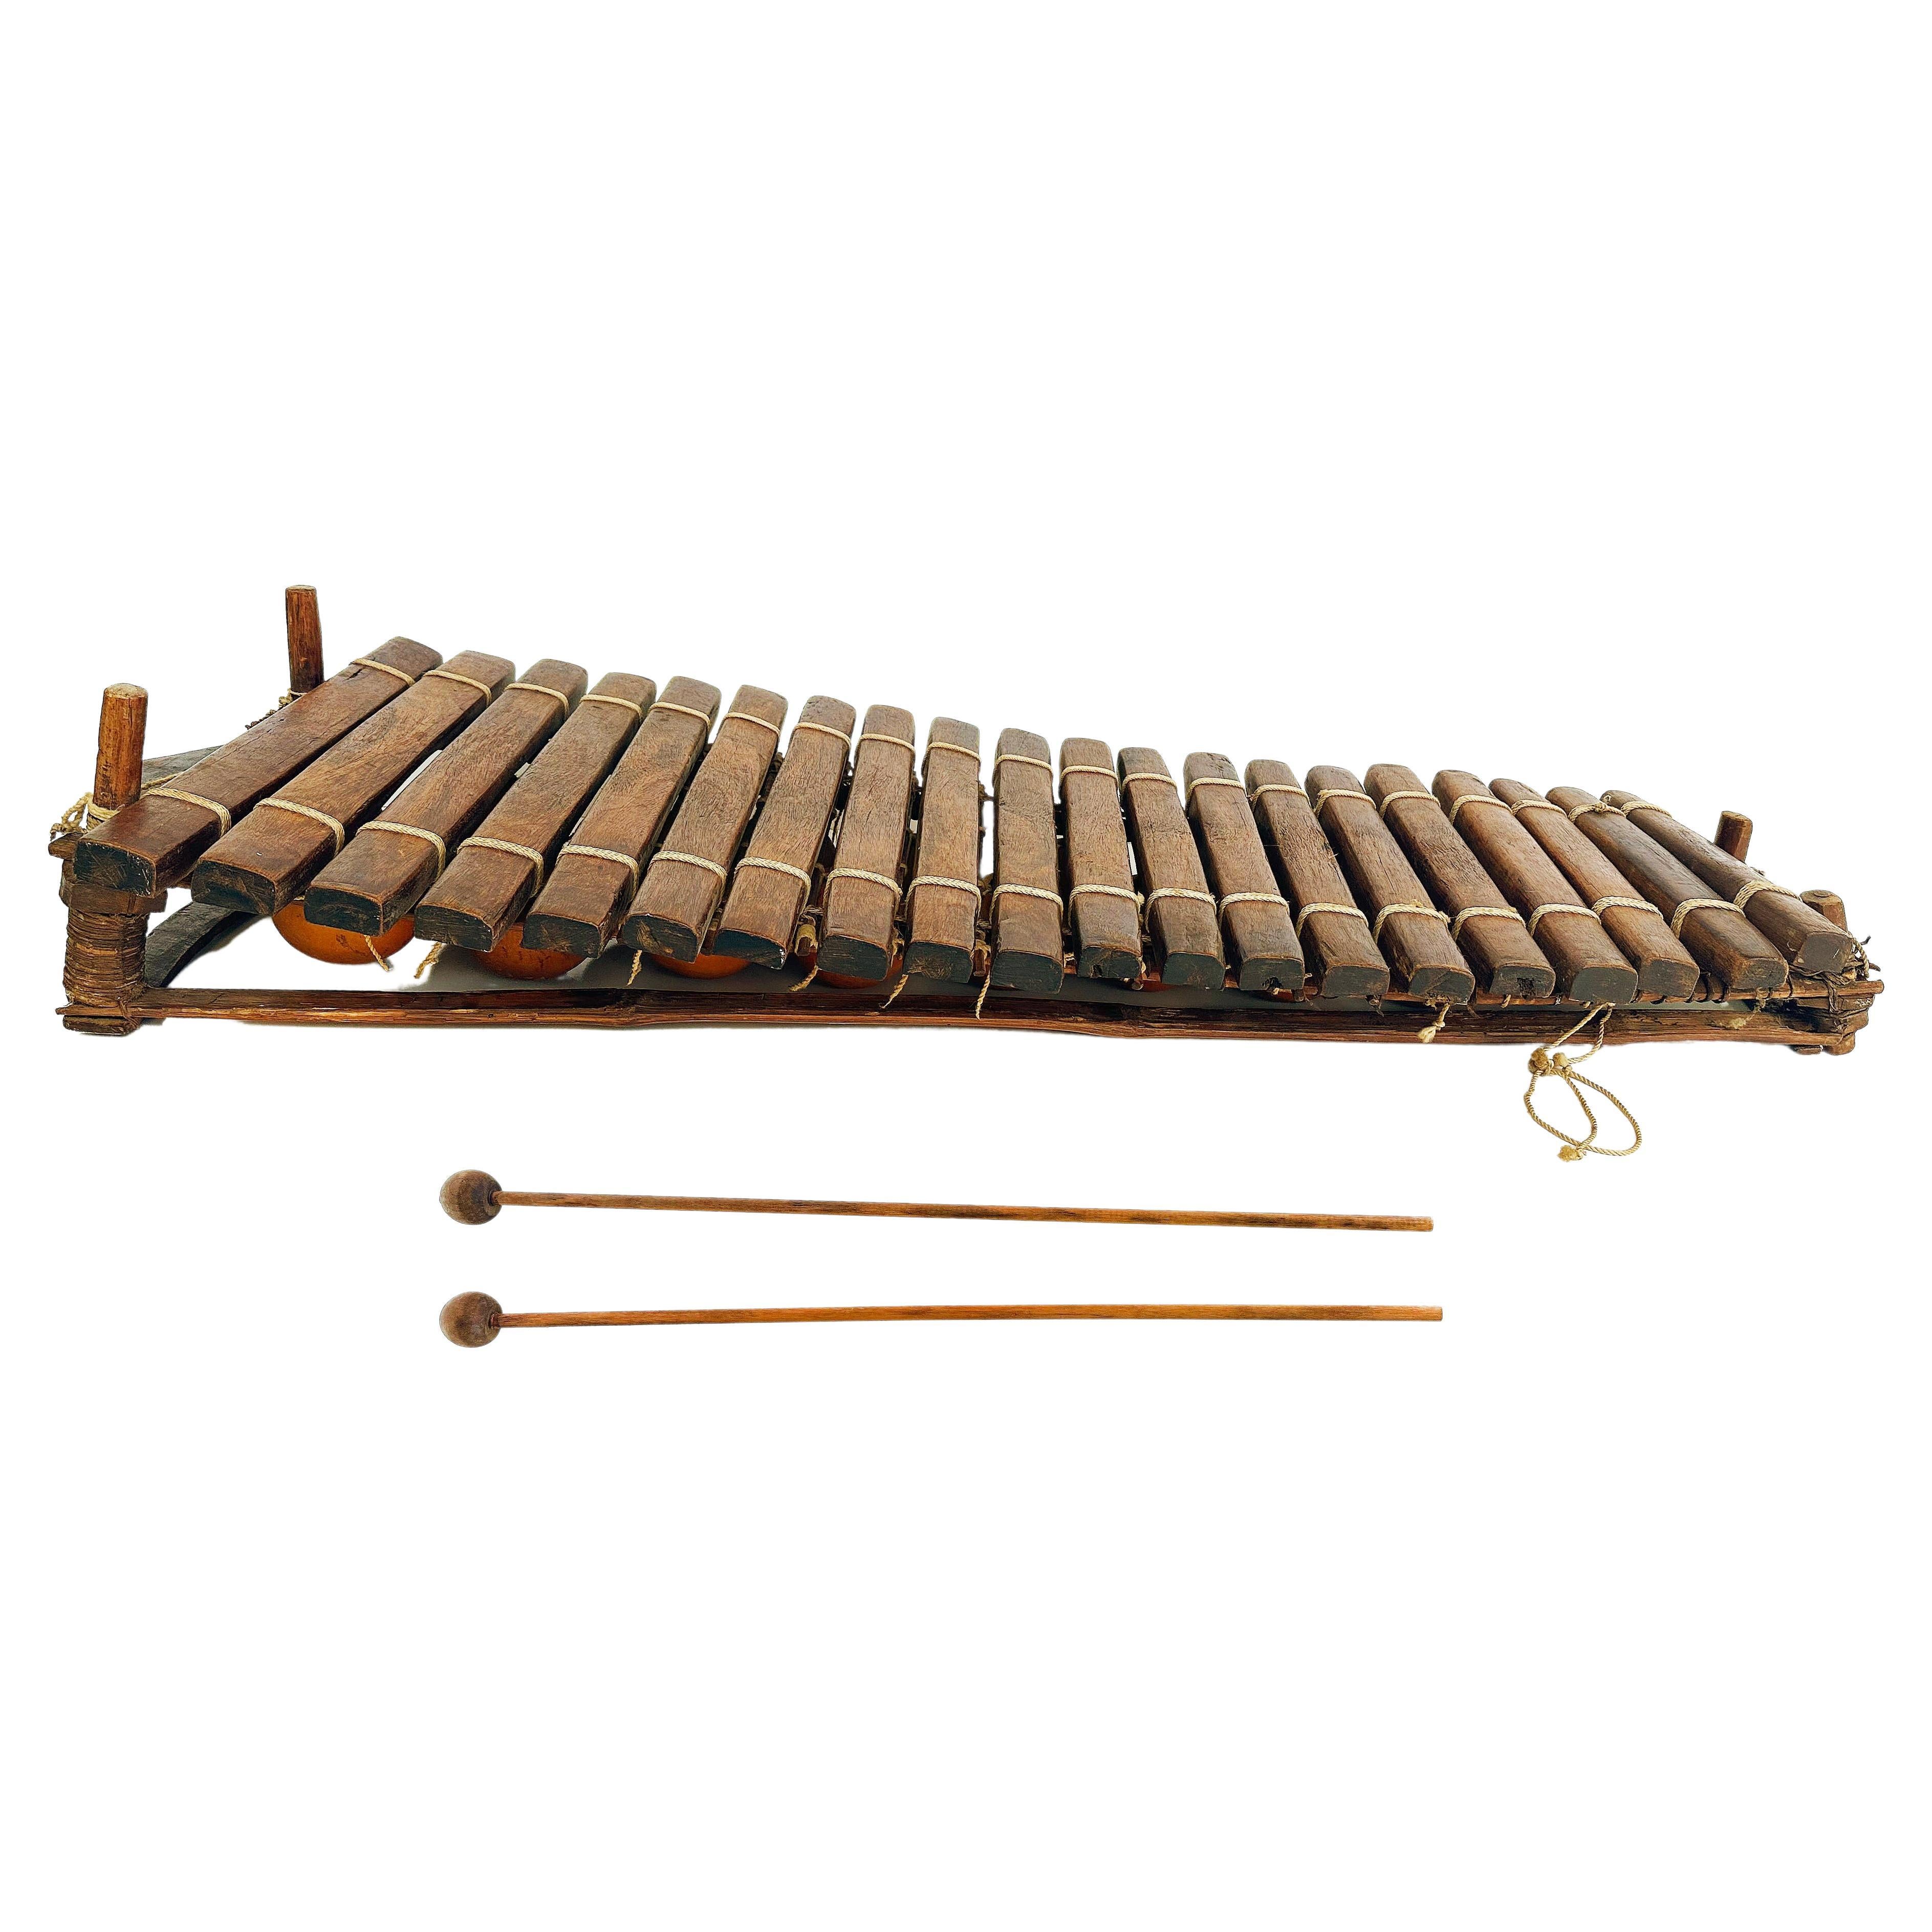 20th Century Rustic African Xylophone with Wood, Gourds, Rope and Mallets For Sale